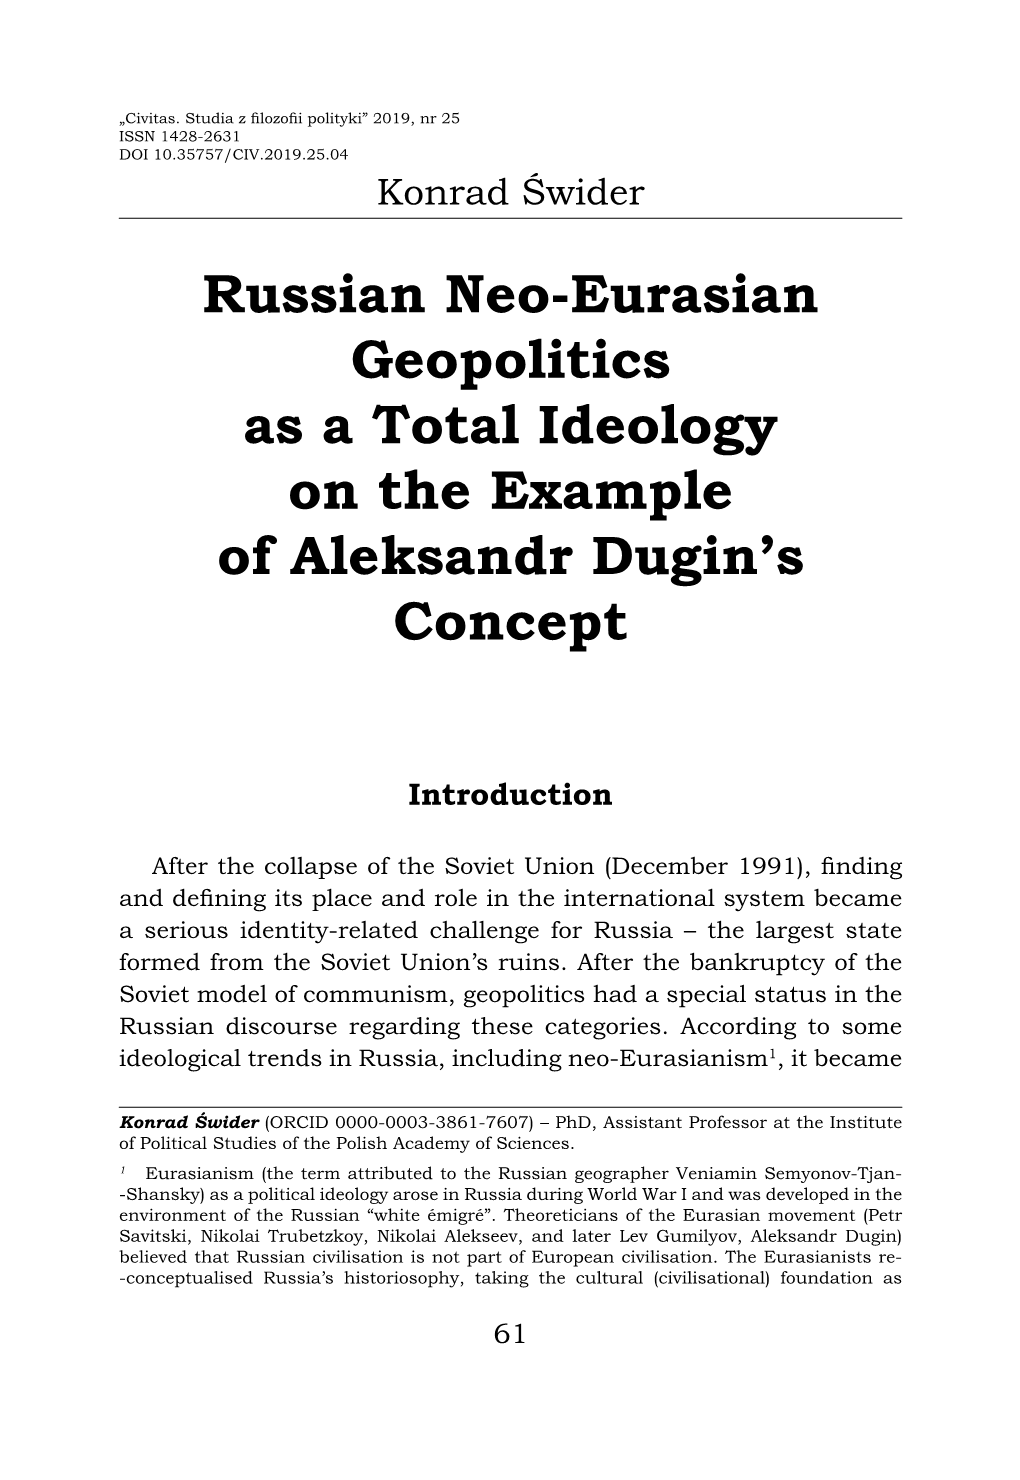 Russian Neo-Eurasian Geopolitics As a Total Ideology on the Example of Aleksandr Dugin’S Concept